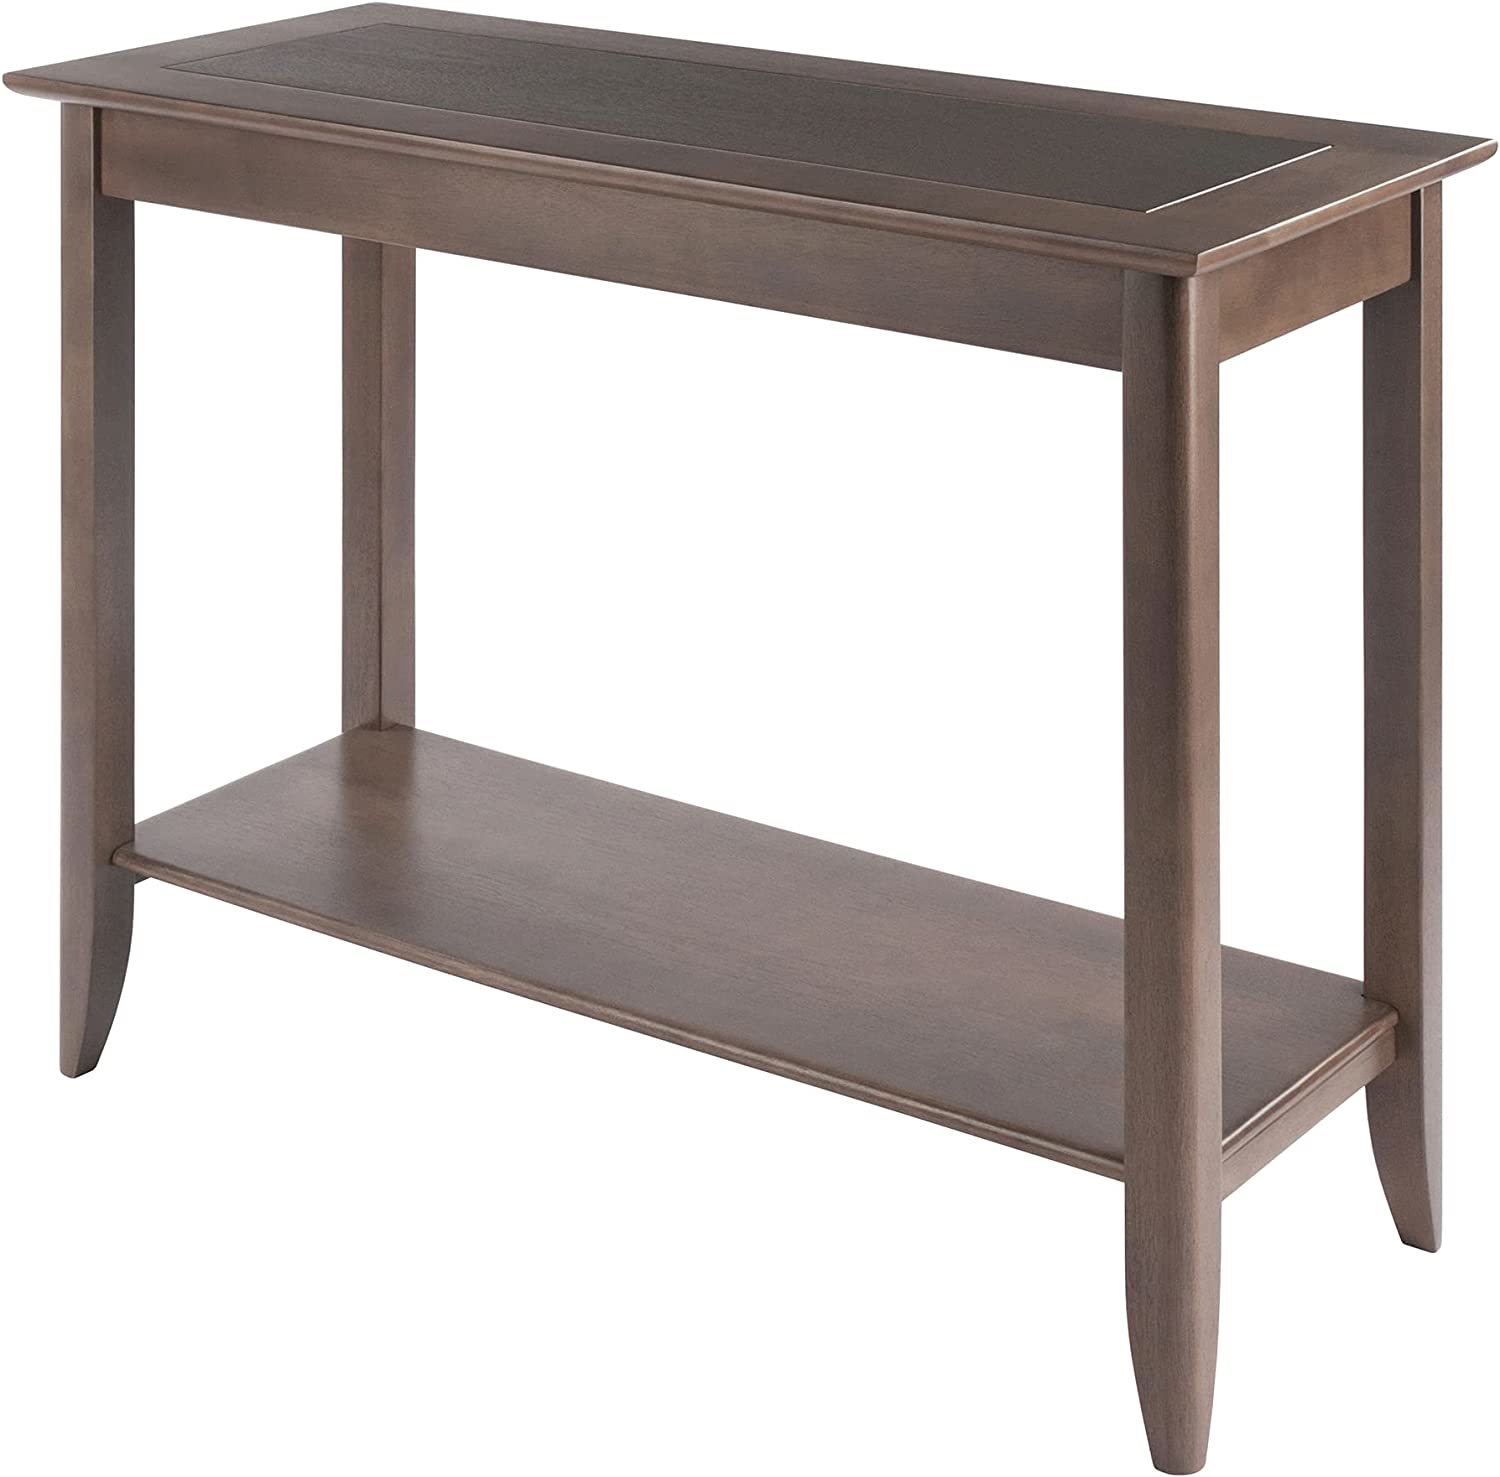 Oyster Gray Winsome 30 H Wood Santino Console Table - $114.99